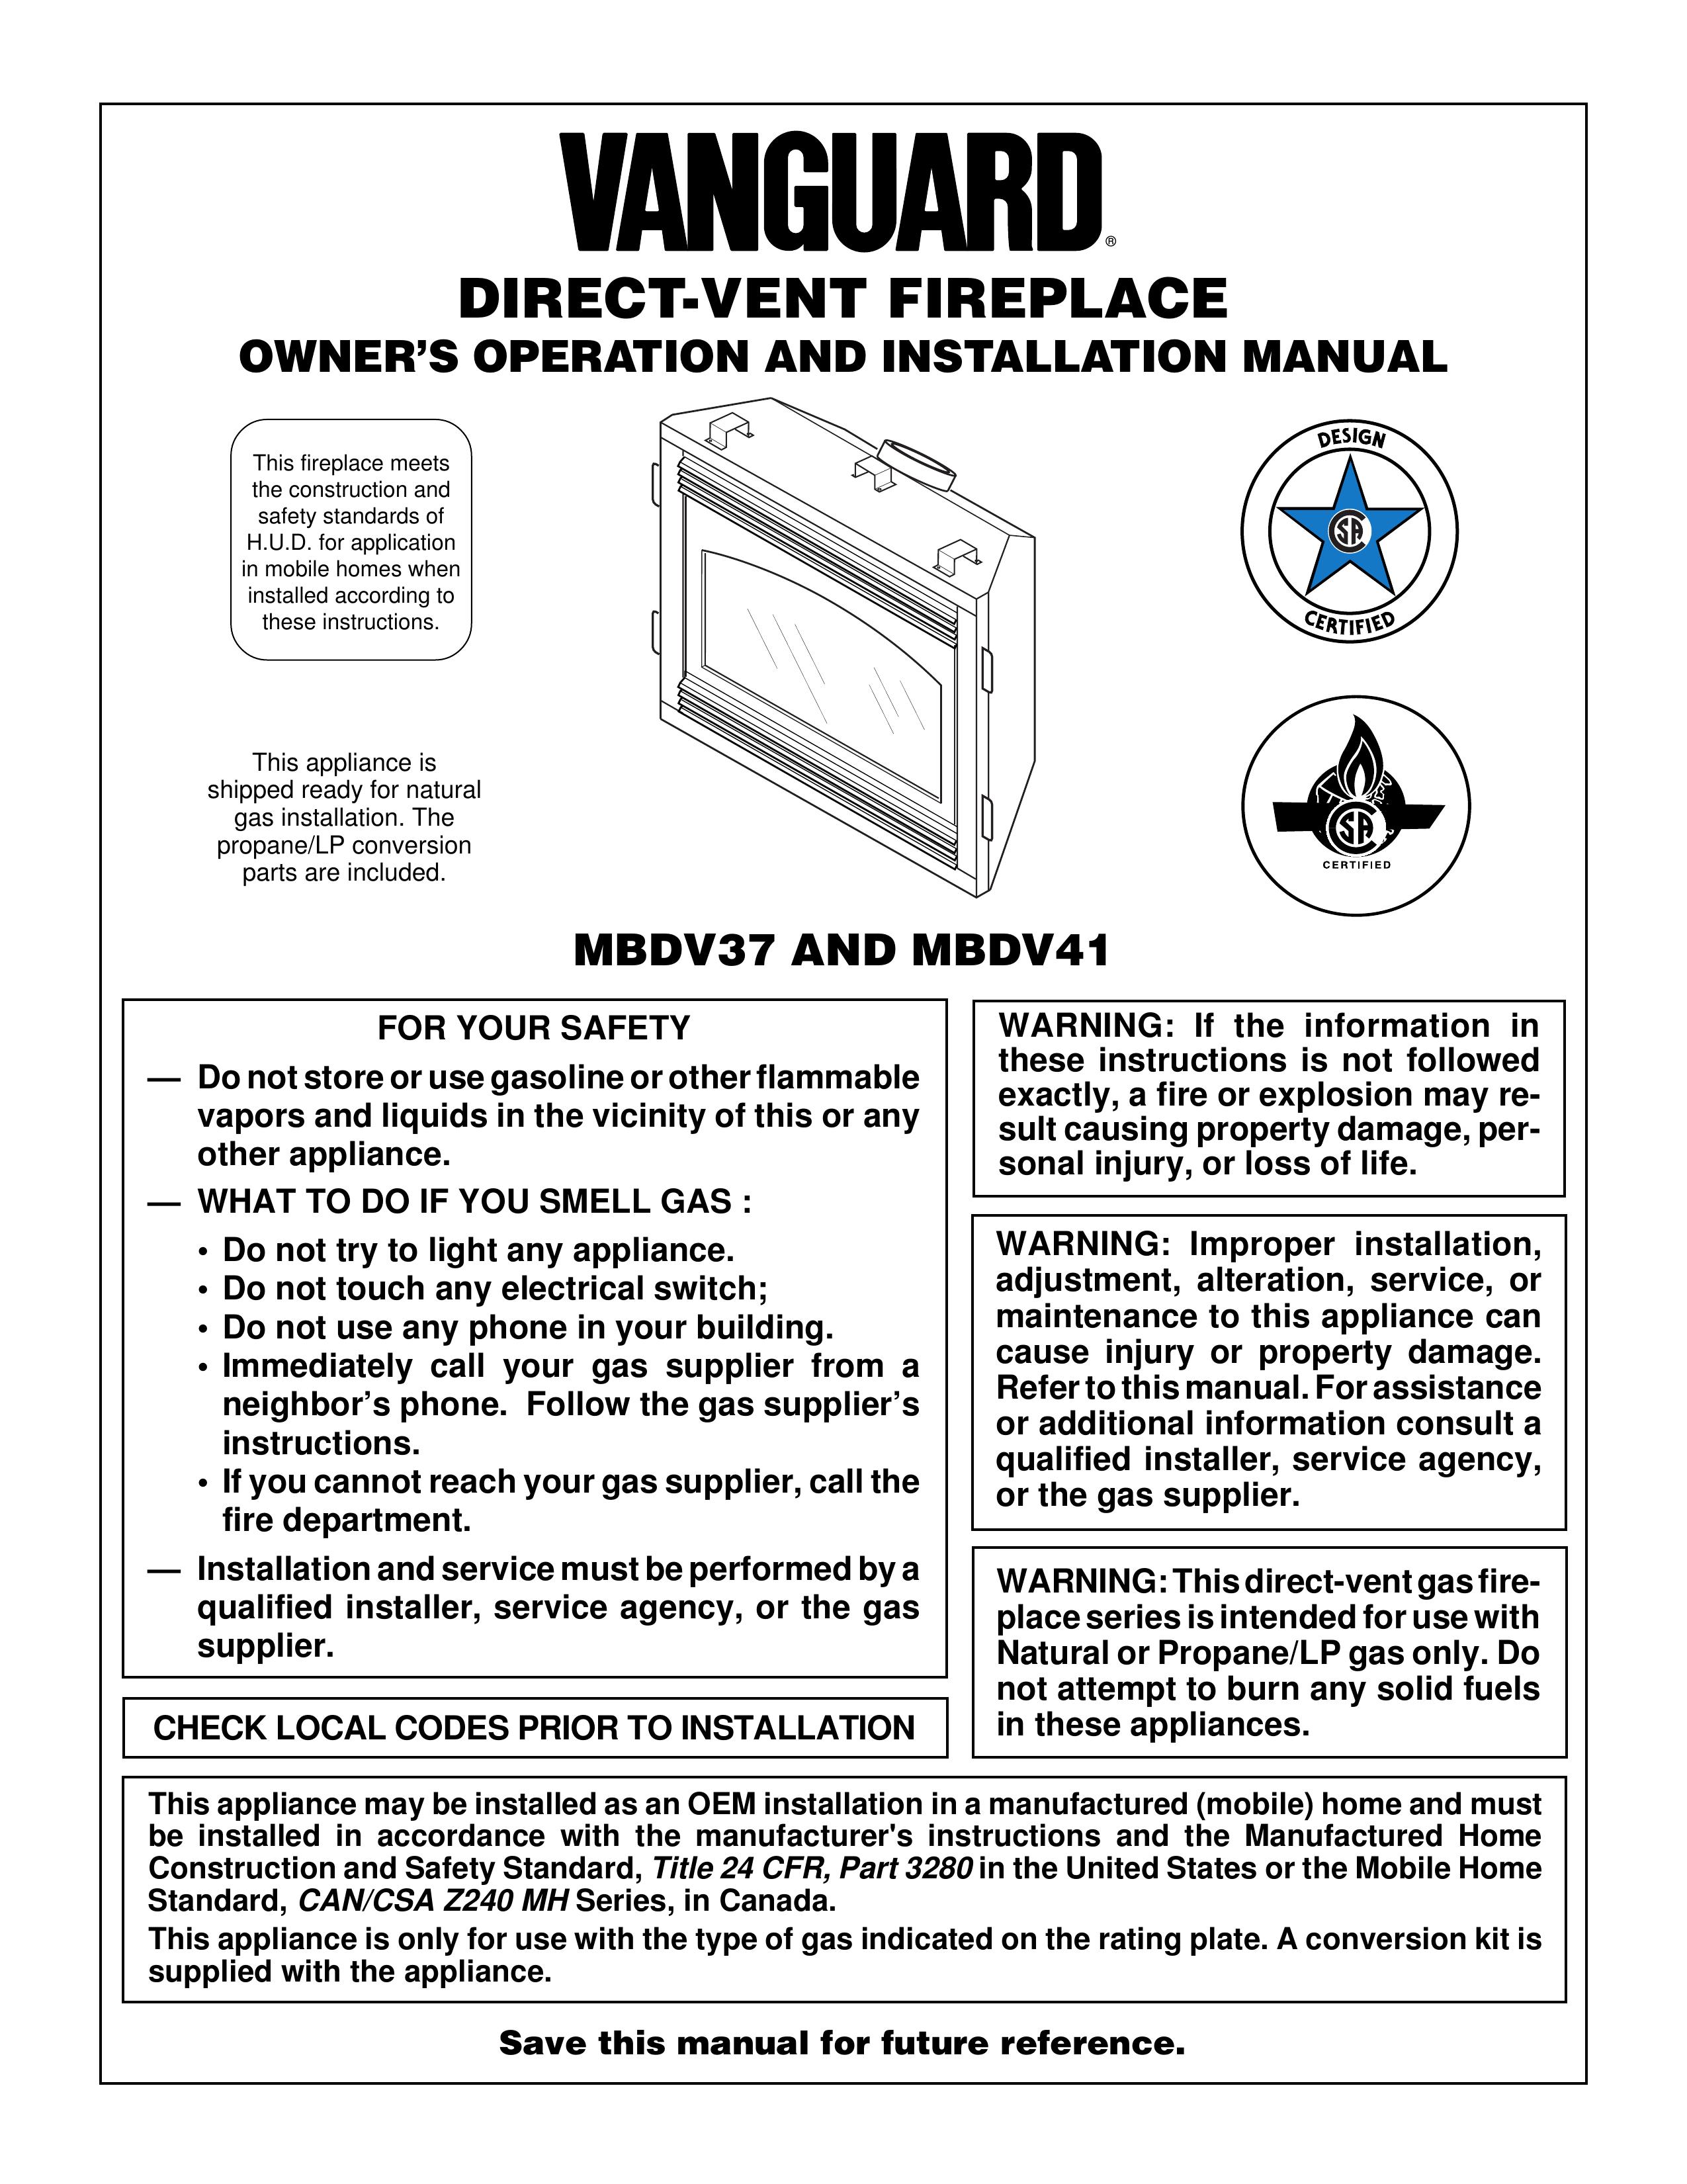 Vanguard Managed Solutions MBDV37 Outdoor Fireplace User Manual